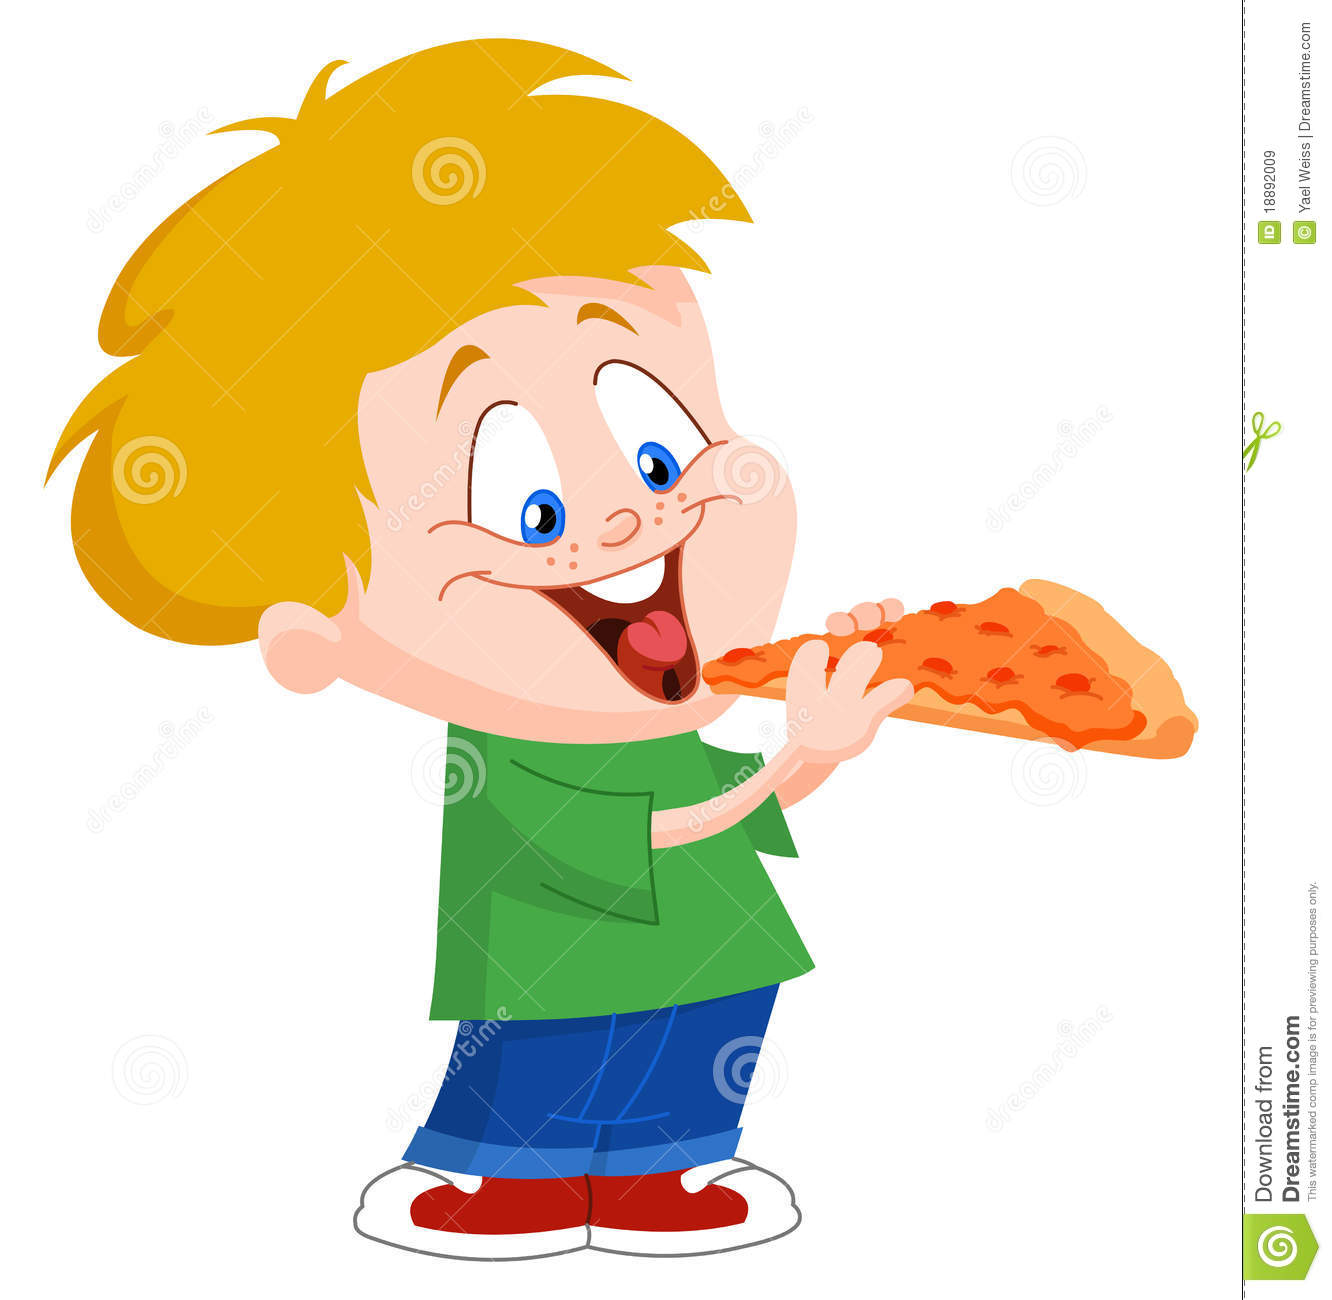 Kid Eating Pizza Royalty Free Stock Images   Image  18892009